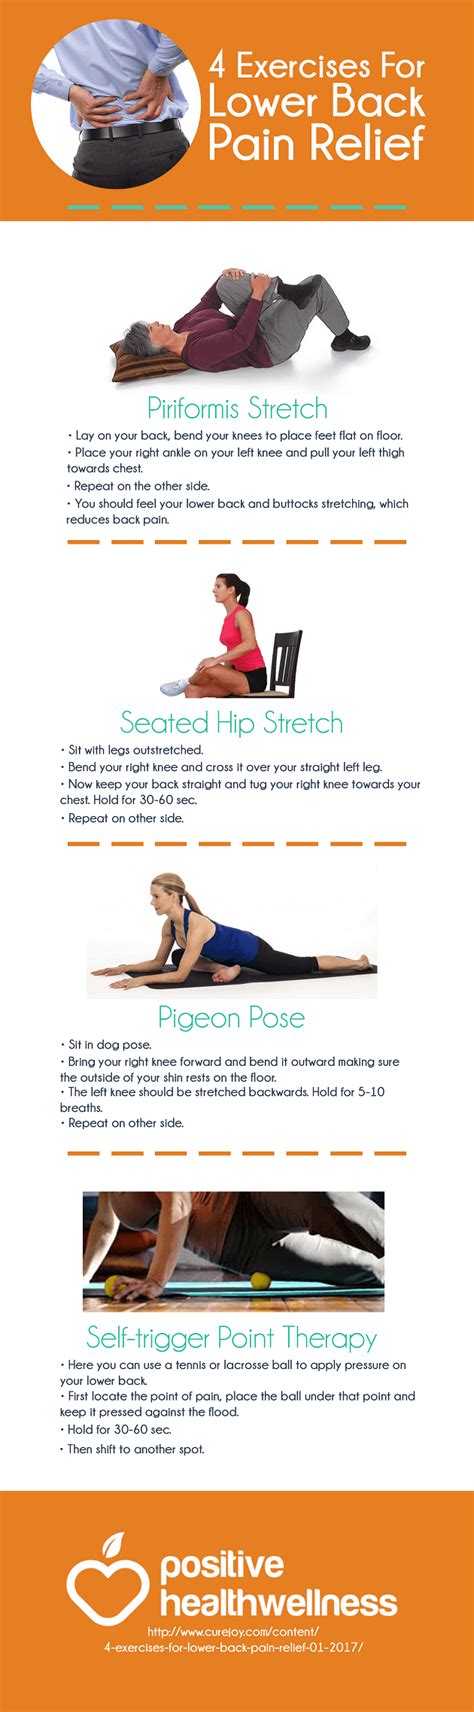 Learns what you can do at home to get relief. 4 Exercises for Lower Back Pain Relief - Infographic